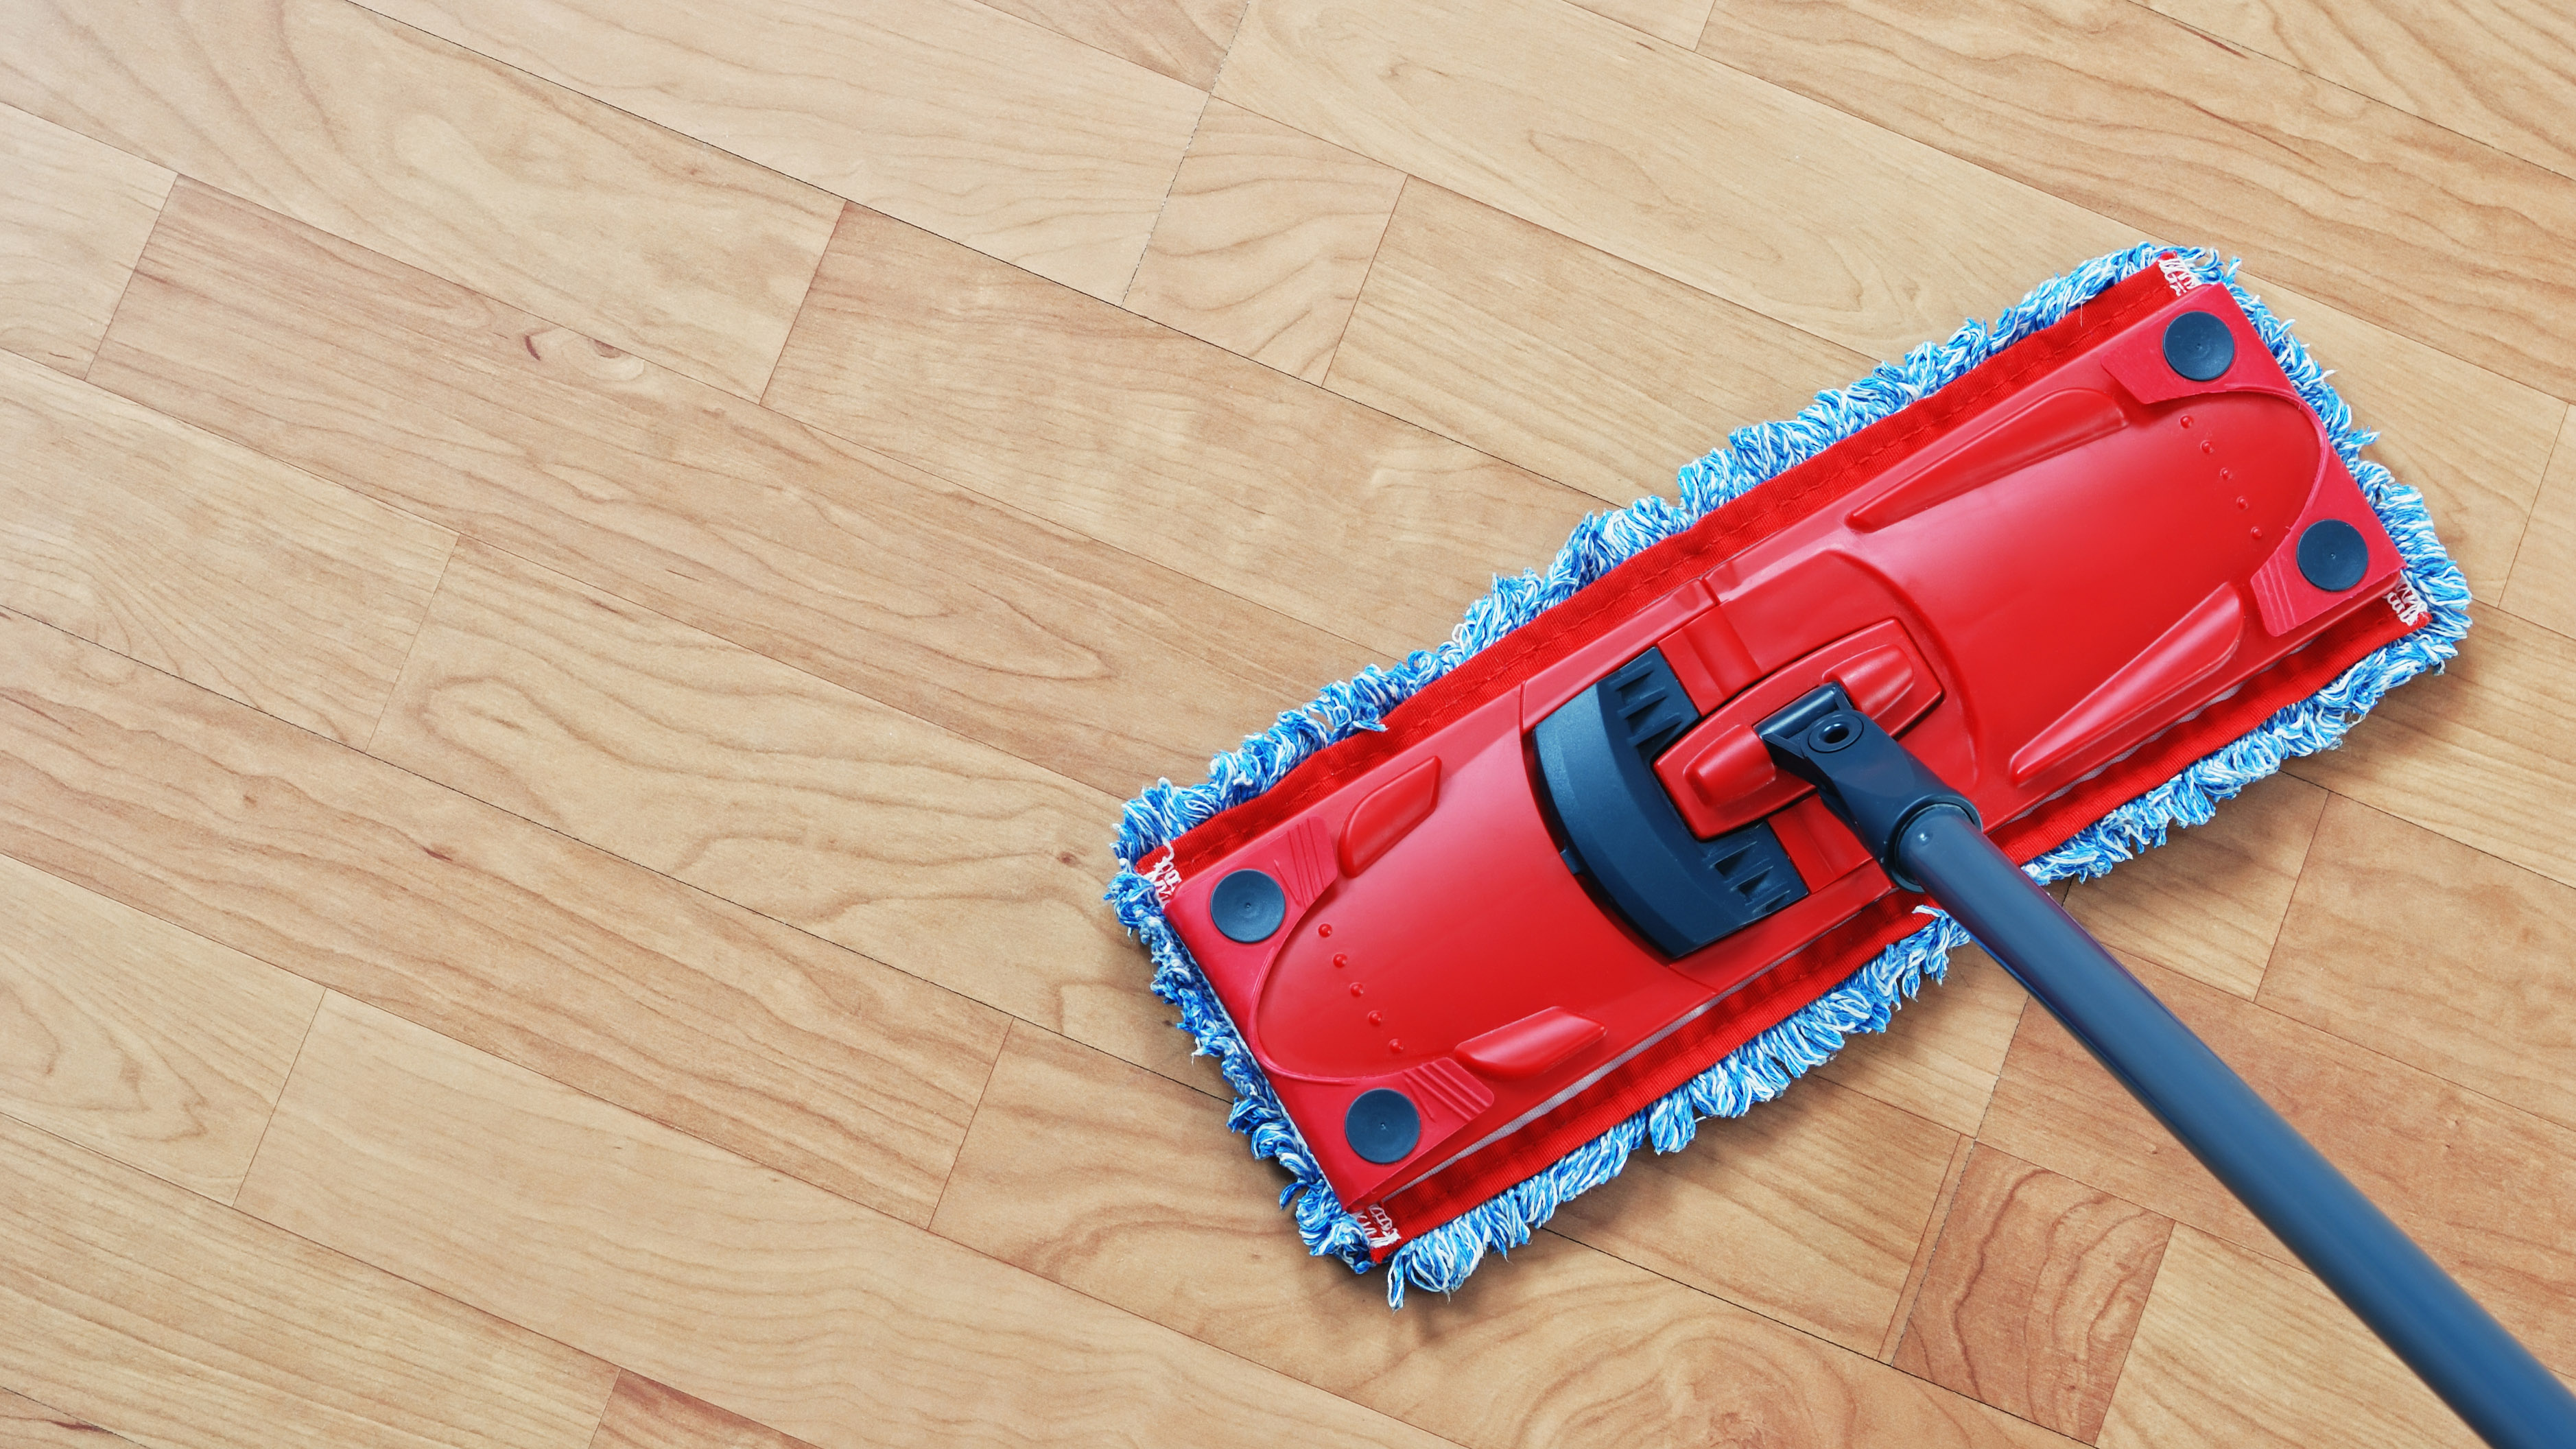 How To Clean Hardwood Floors Without, Can You Steam Clean Carpet Over Hardwood Floors